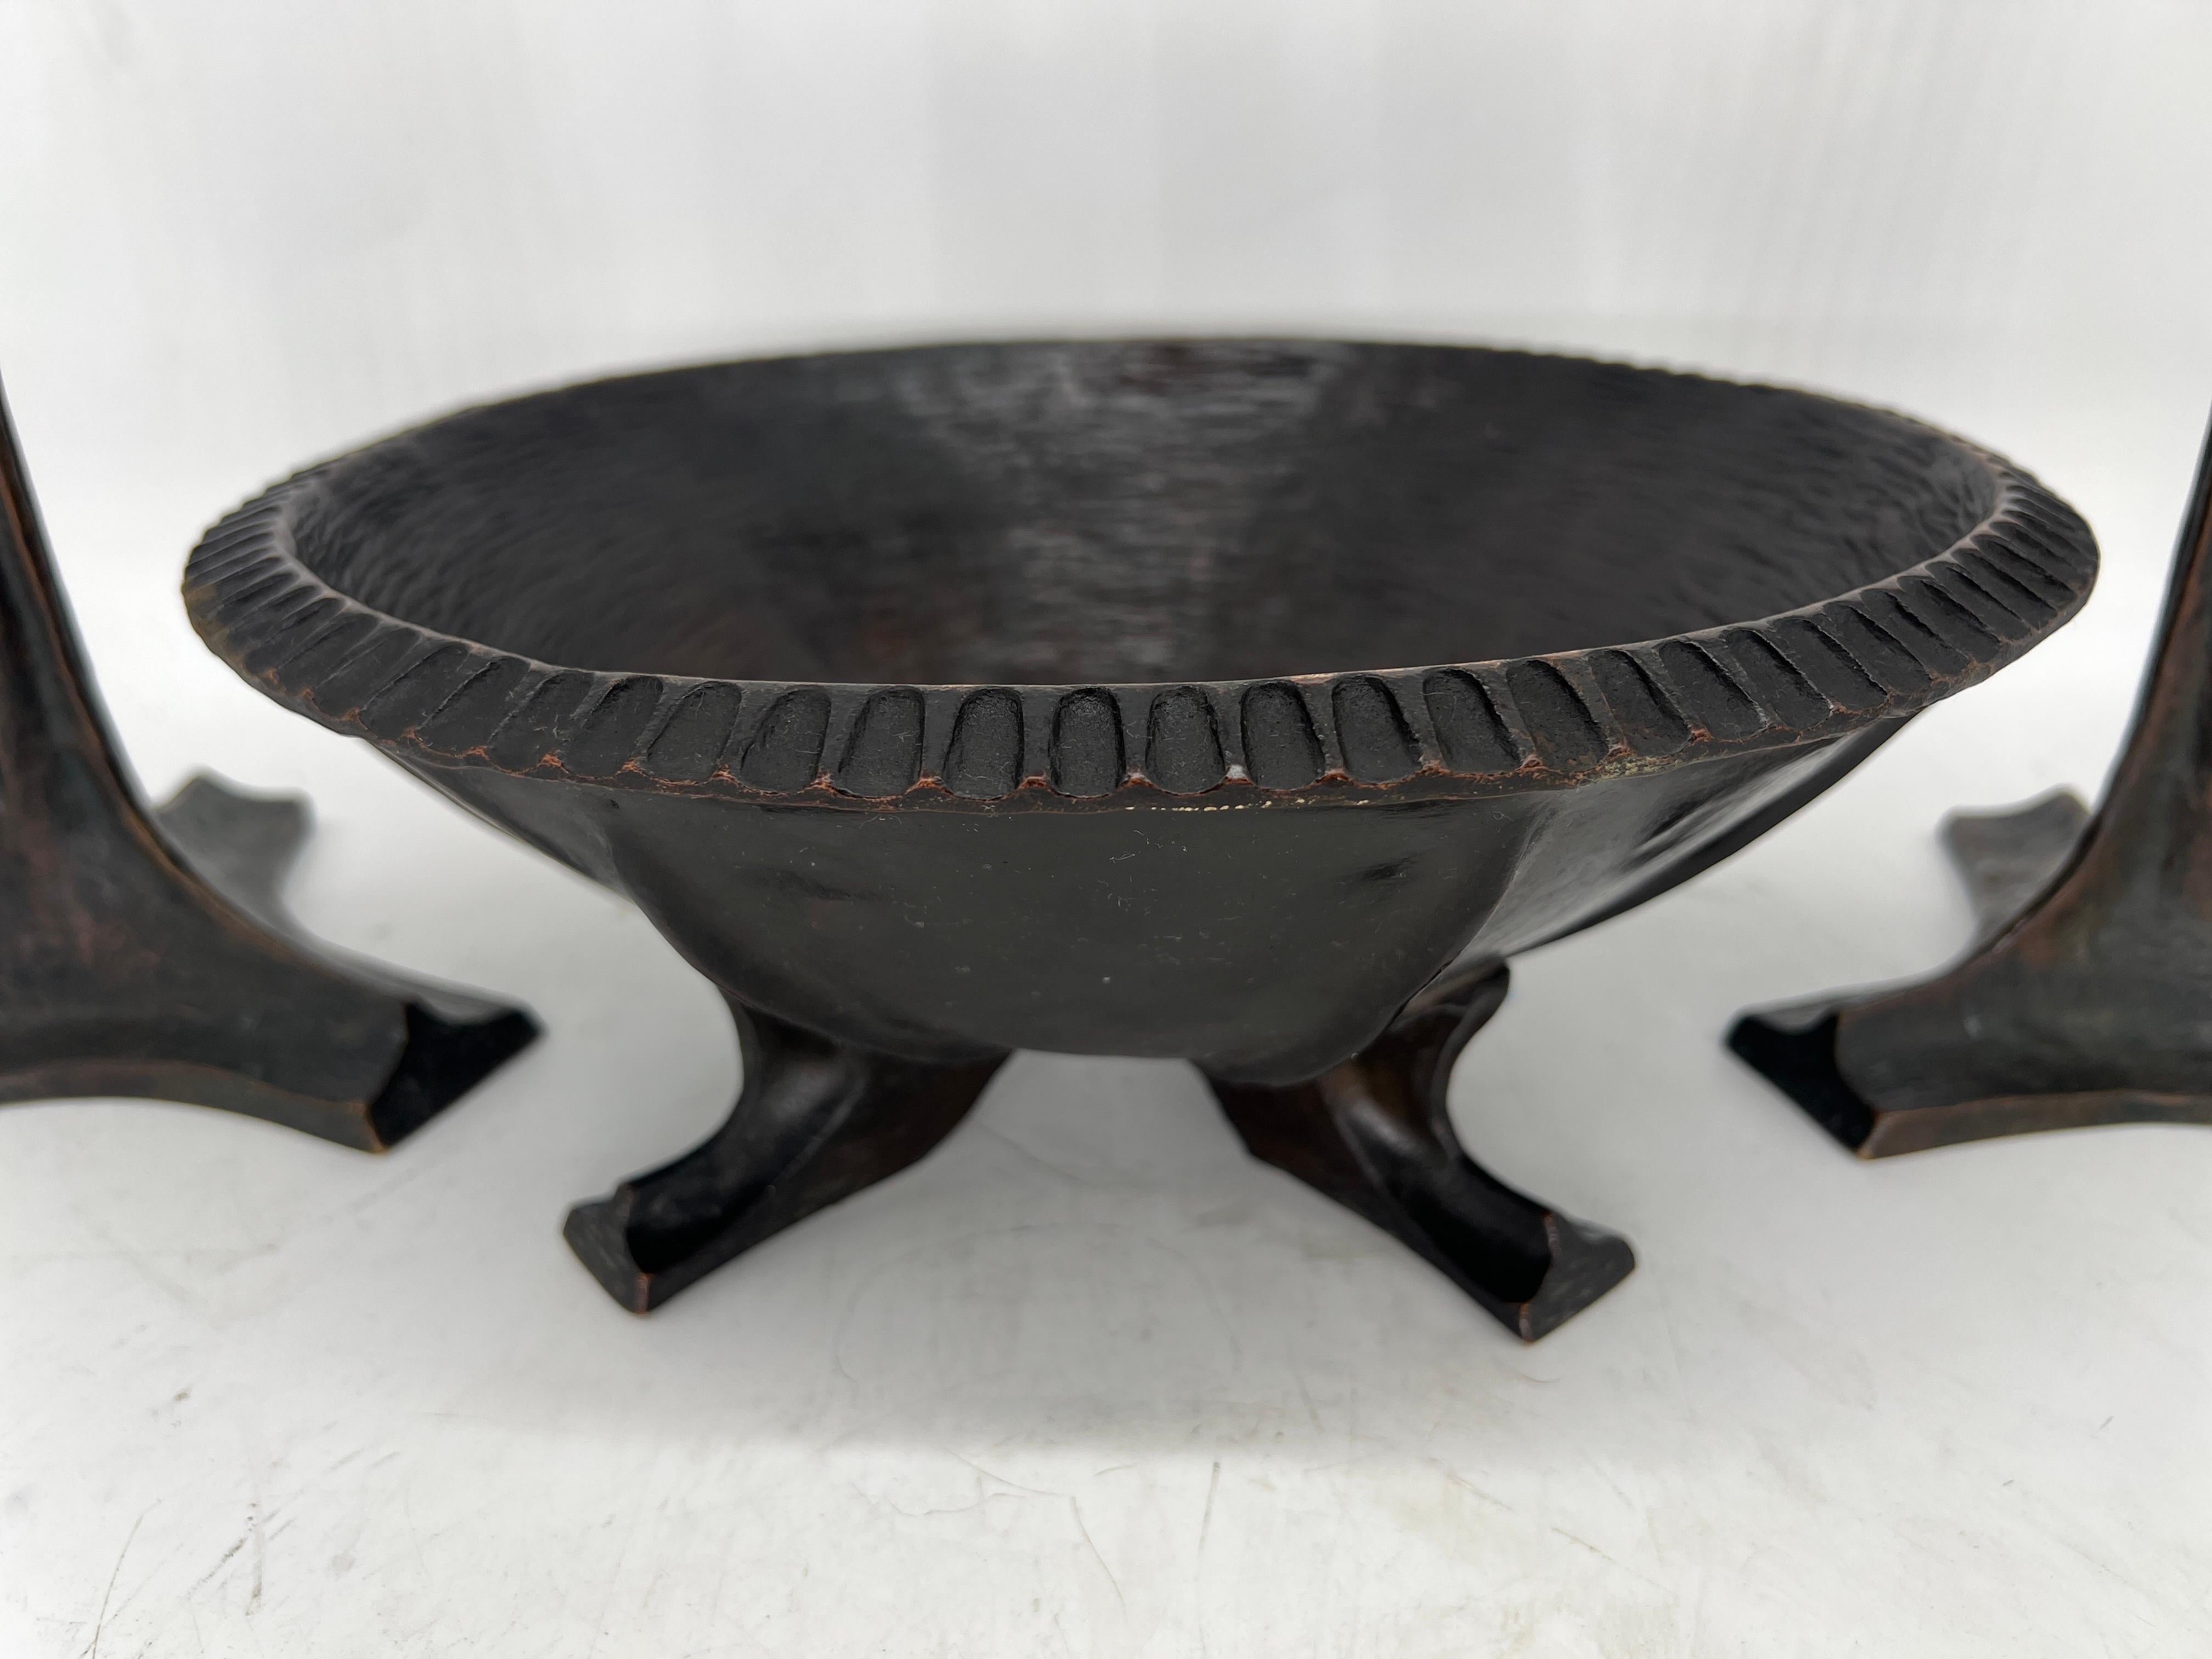 American, late 19th to early 20th century.

The set consists of a large bronze centerpiece bowl which has been hand forged with a reeded recessed edge, water sculpted interior, paneled bottom and resting on four finely detailed feet. Note: This bowl